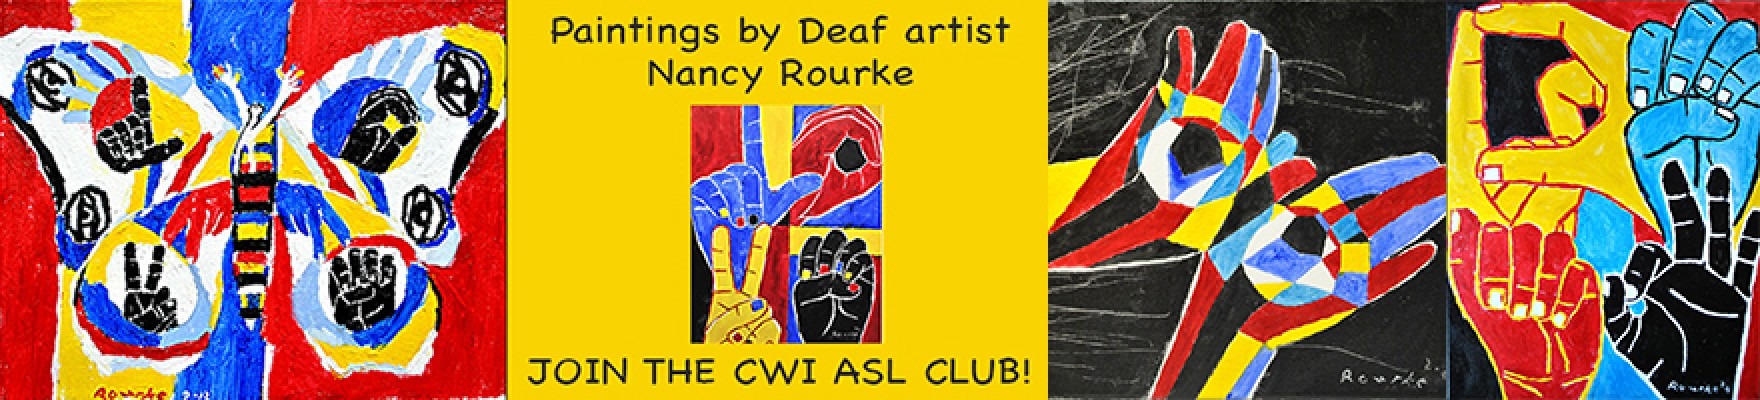 Join the CWI ASL Club! Painting by Deaf Student Nancy Rourke.